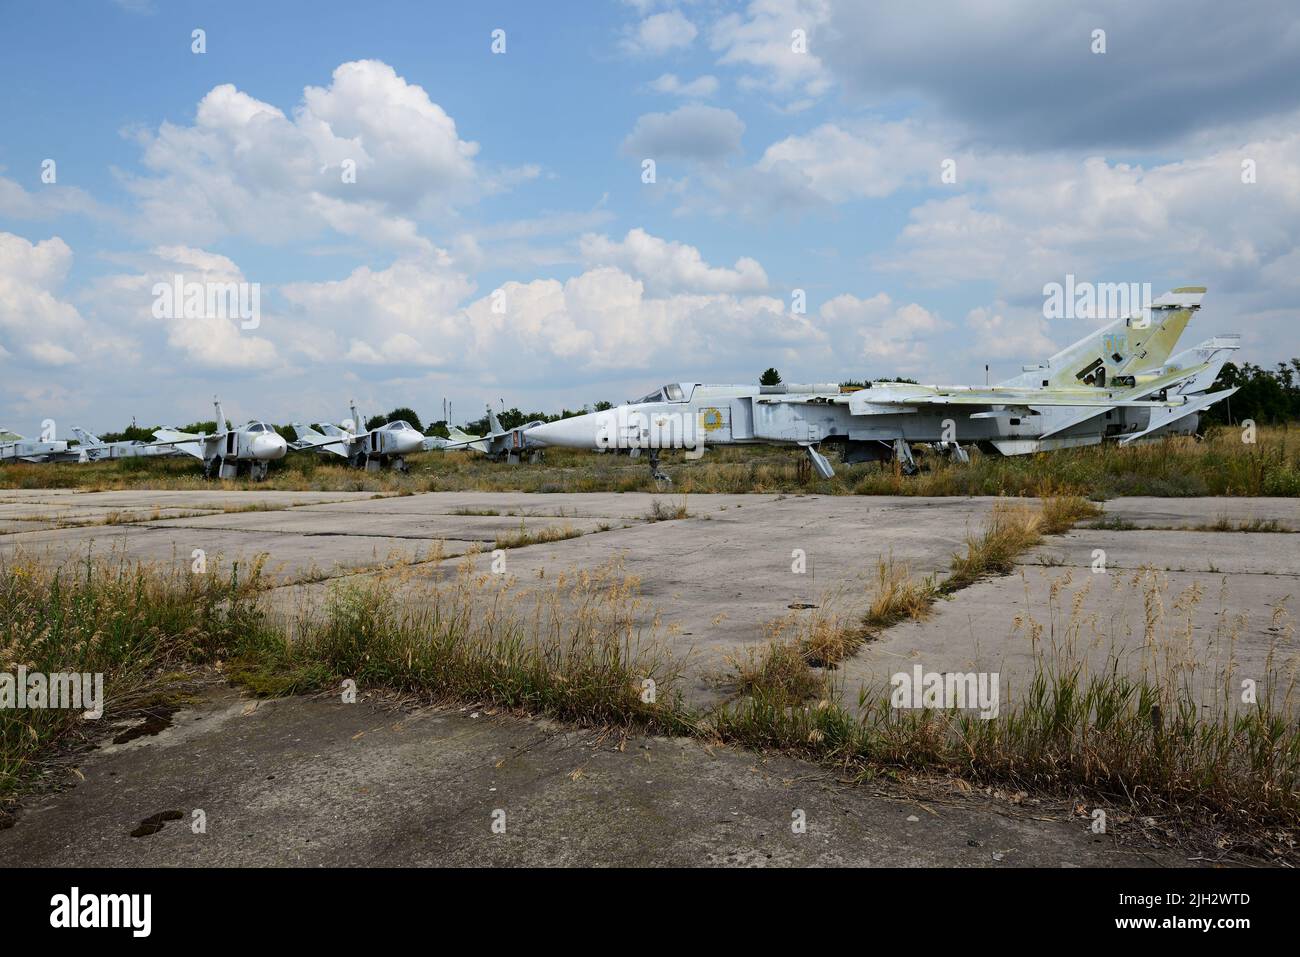 BILA TSERKVA, UKRAINE - AUGUST 25: The view on disassembled Ukrainian Sukhoi Su-24 supersonic all-weather attack aircrafts on August 25, 2021 in Bila Stock Photo